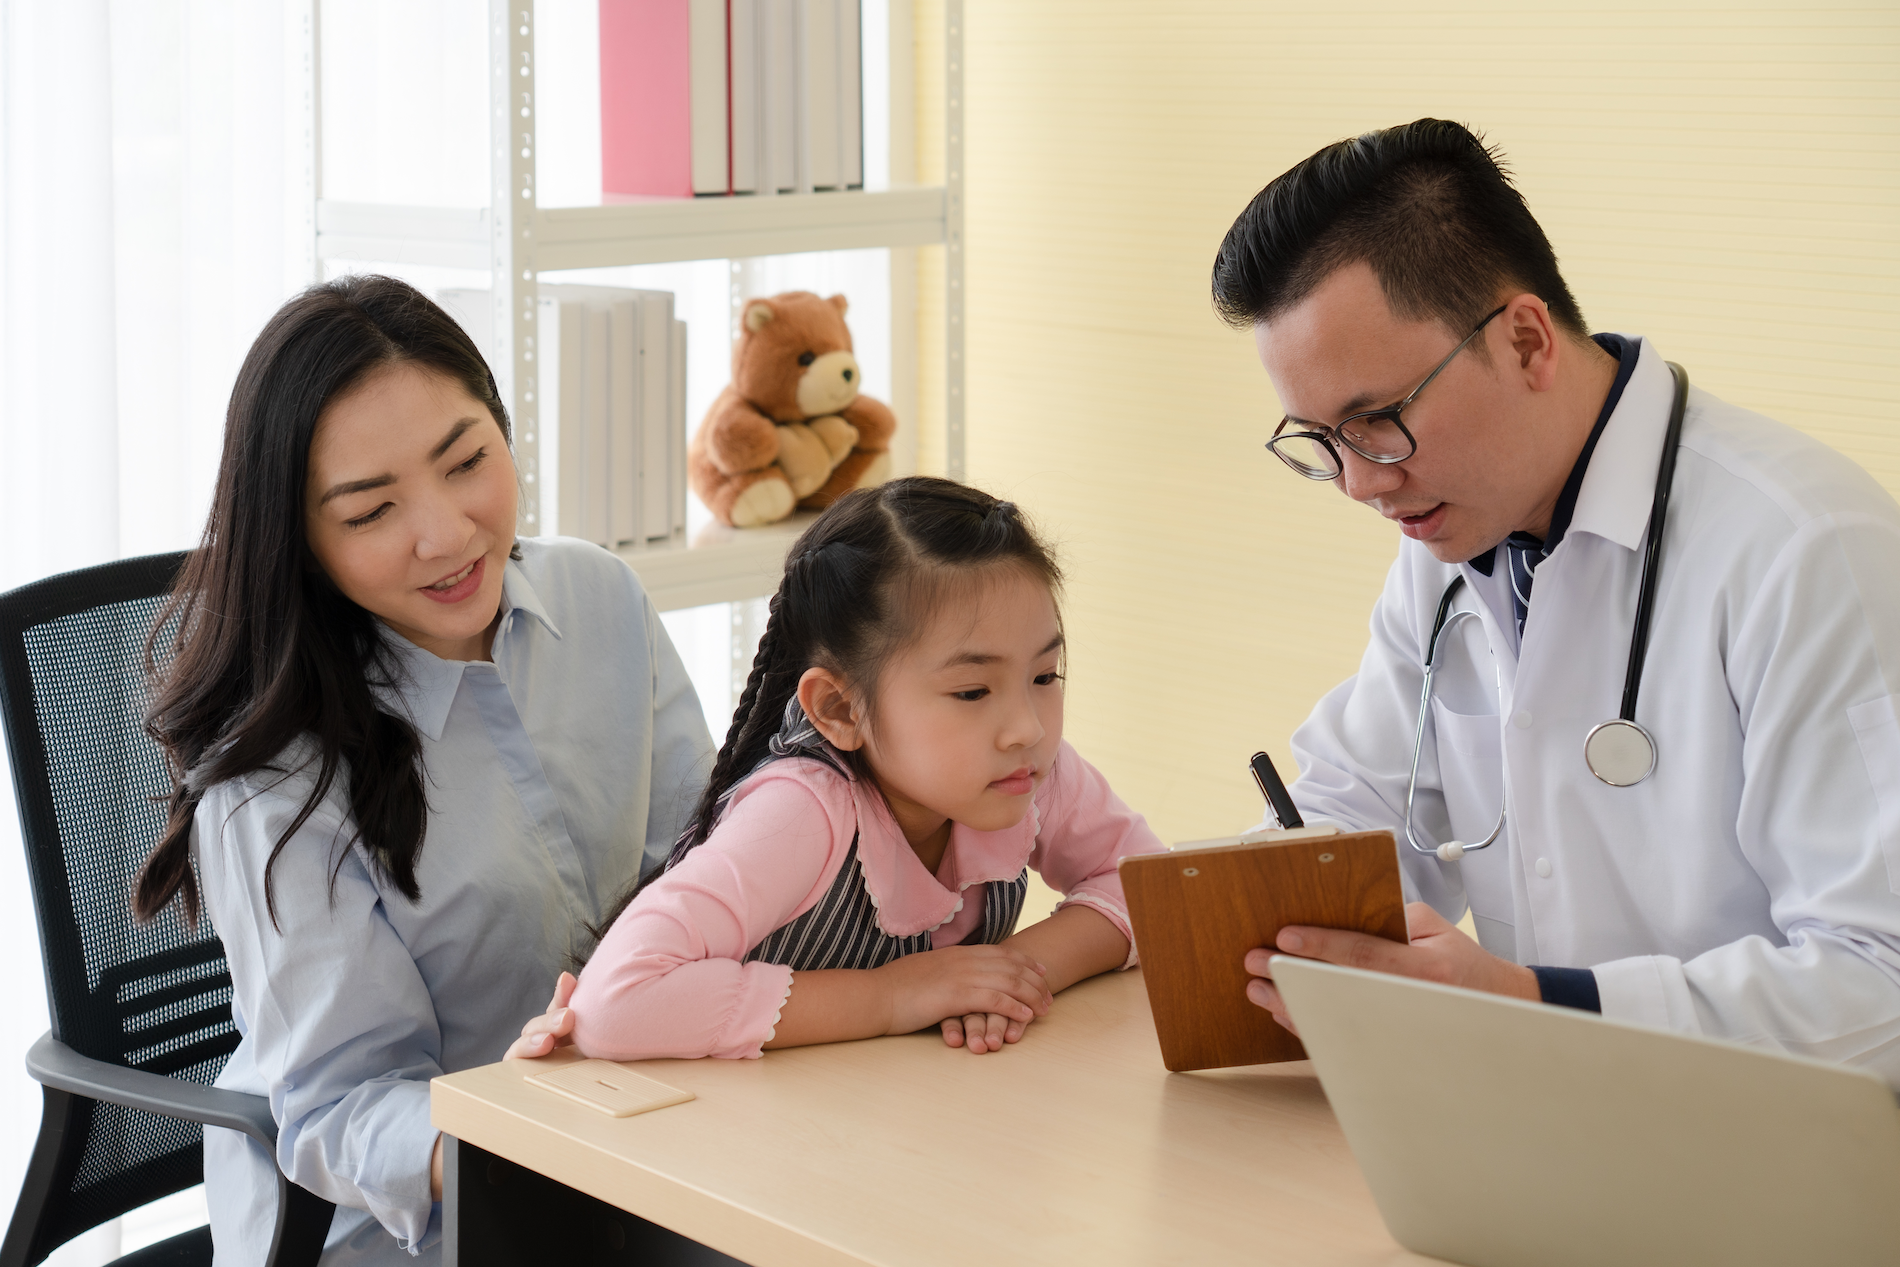 An asian woman sits in a chair with her daughter on her lap. She wears braided pigtails and a pink top. The little girl leans over a desk. An male Asian doctor is showing her something on a notepad.